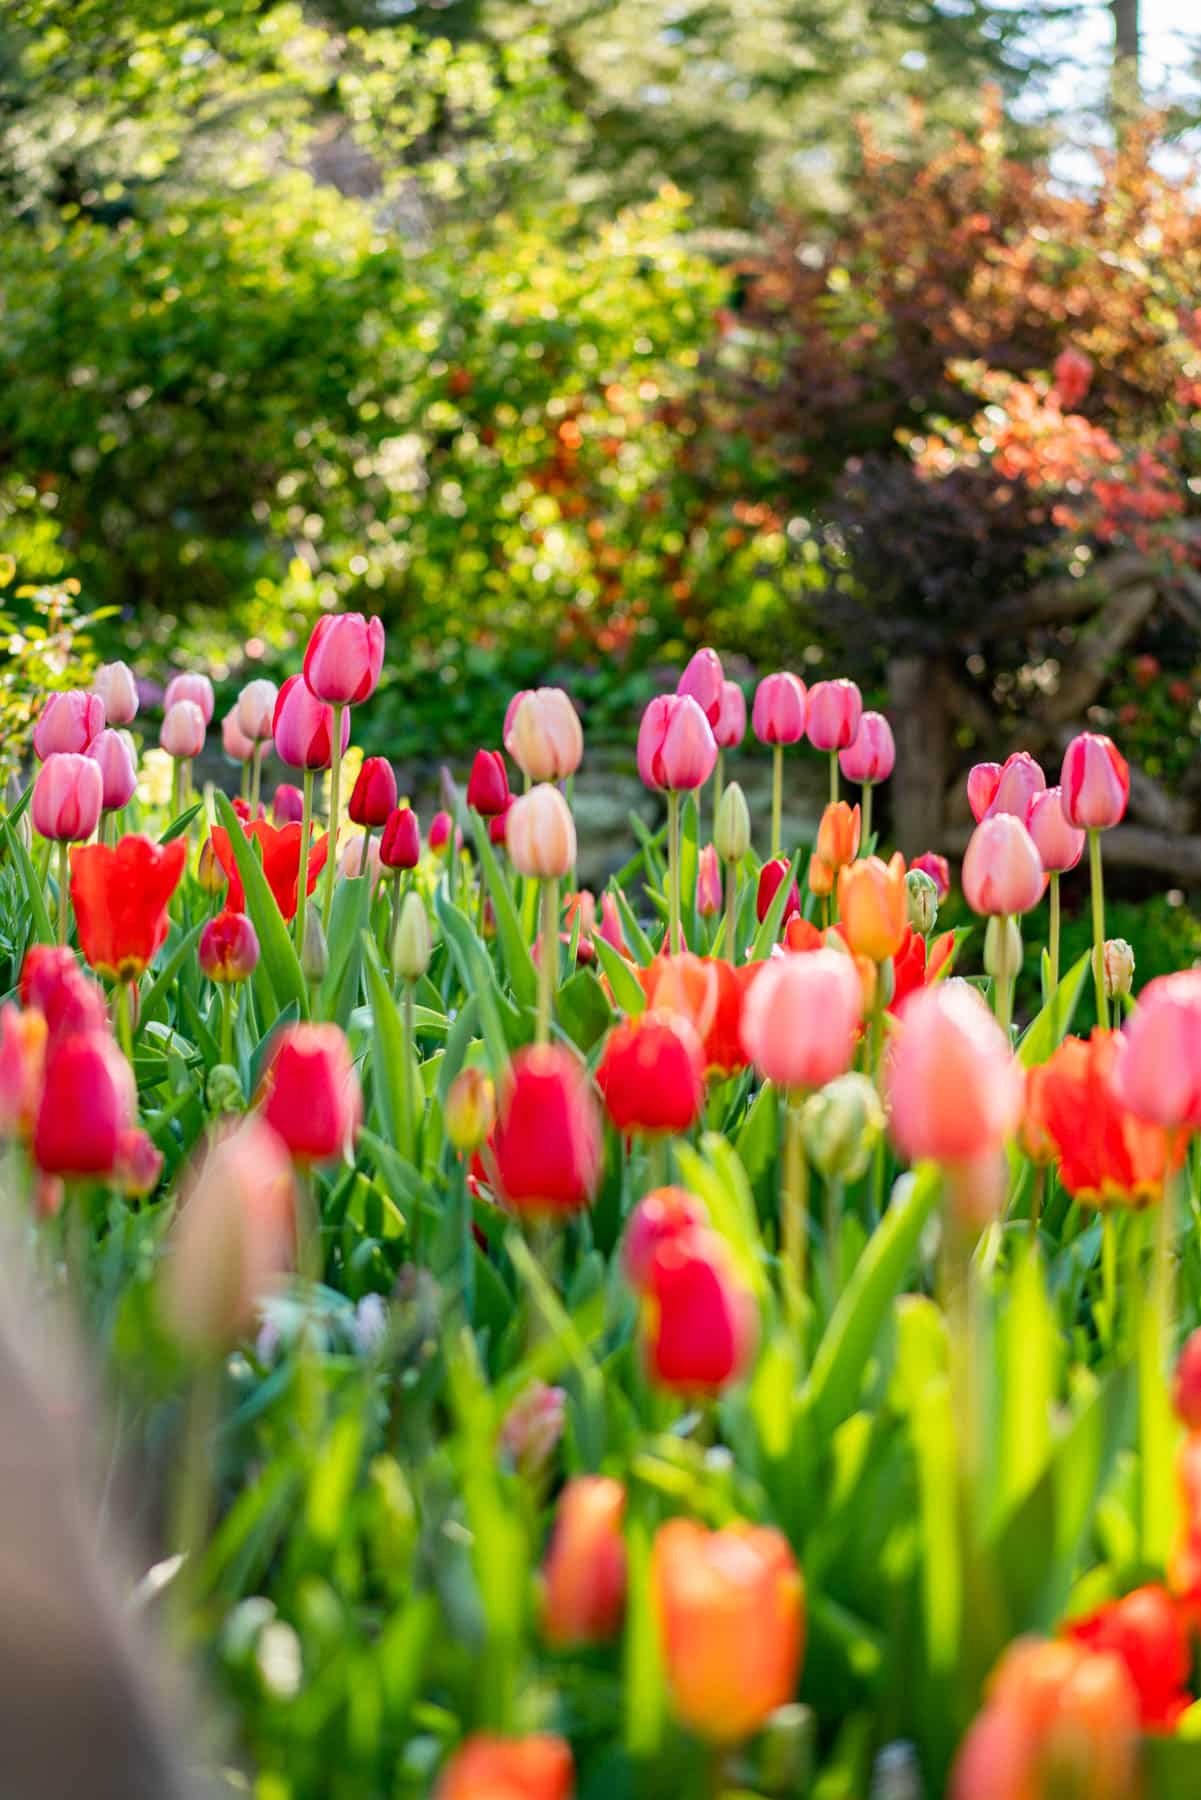 Tulips at the Shakespeare Garden in Central Park in NYC